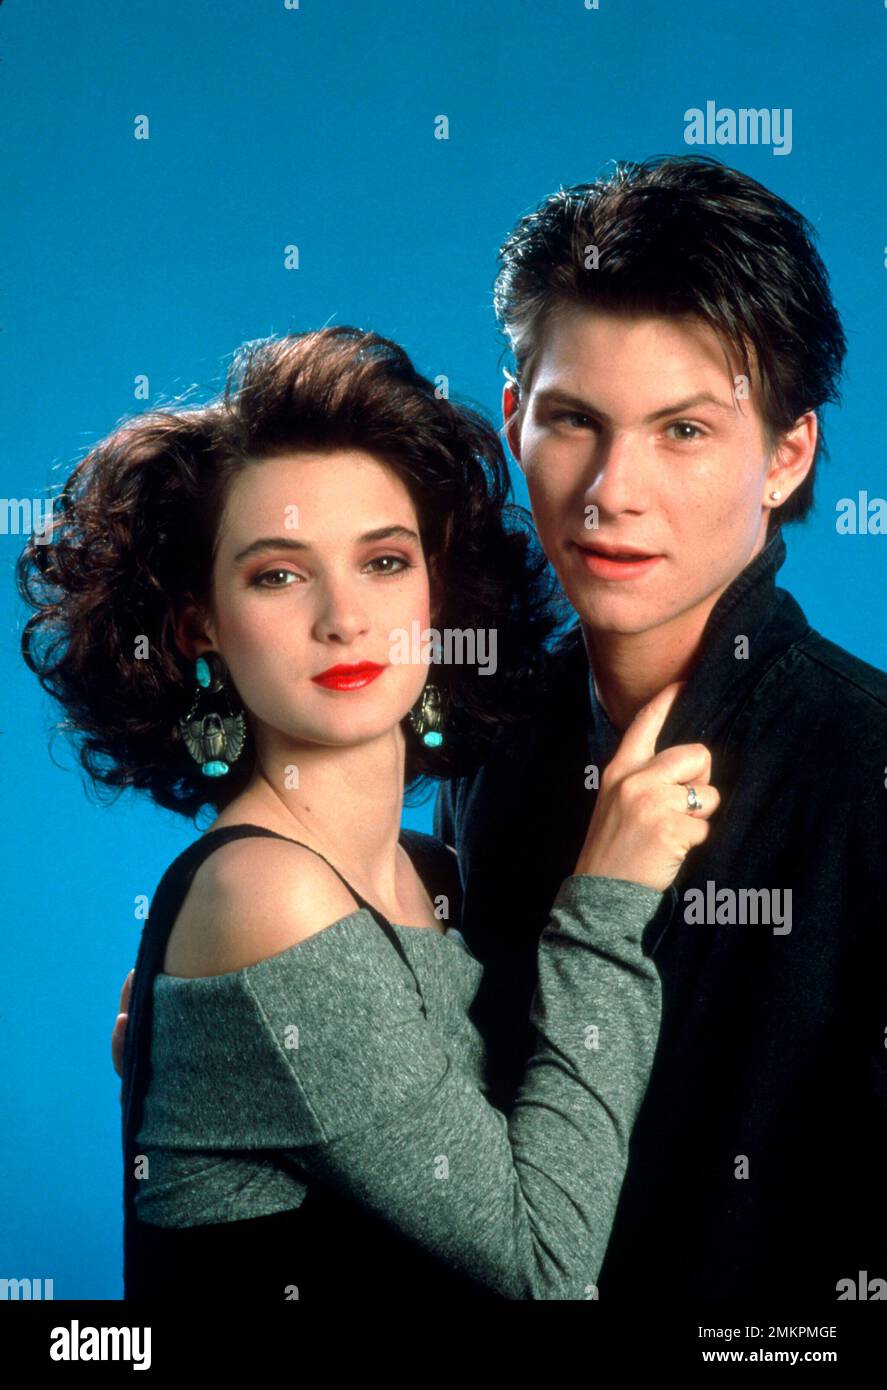 WINONA RYDER and CHRISTIAN SLATER in HEATHERS (1989), directed by MICHAEL LEHMANN. Credit: CINEMARQUE-NEW WORLD / Album Stock Photo